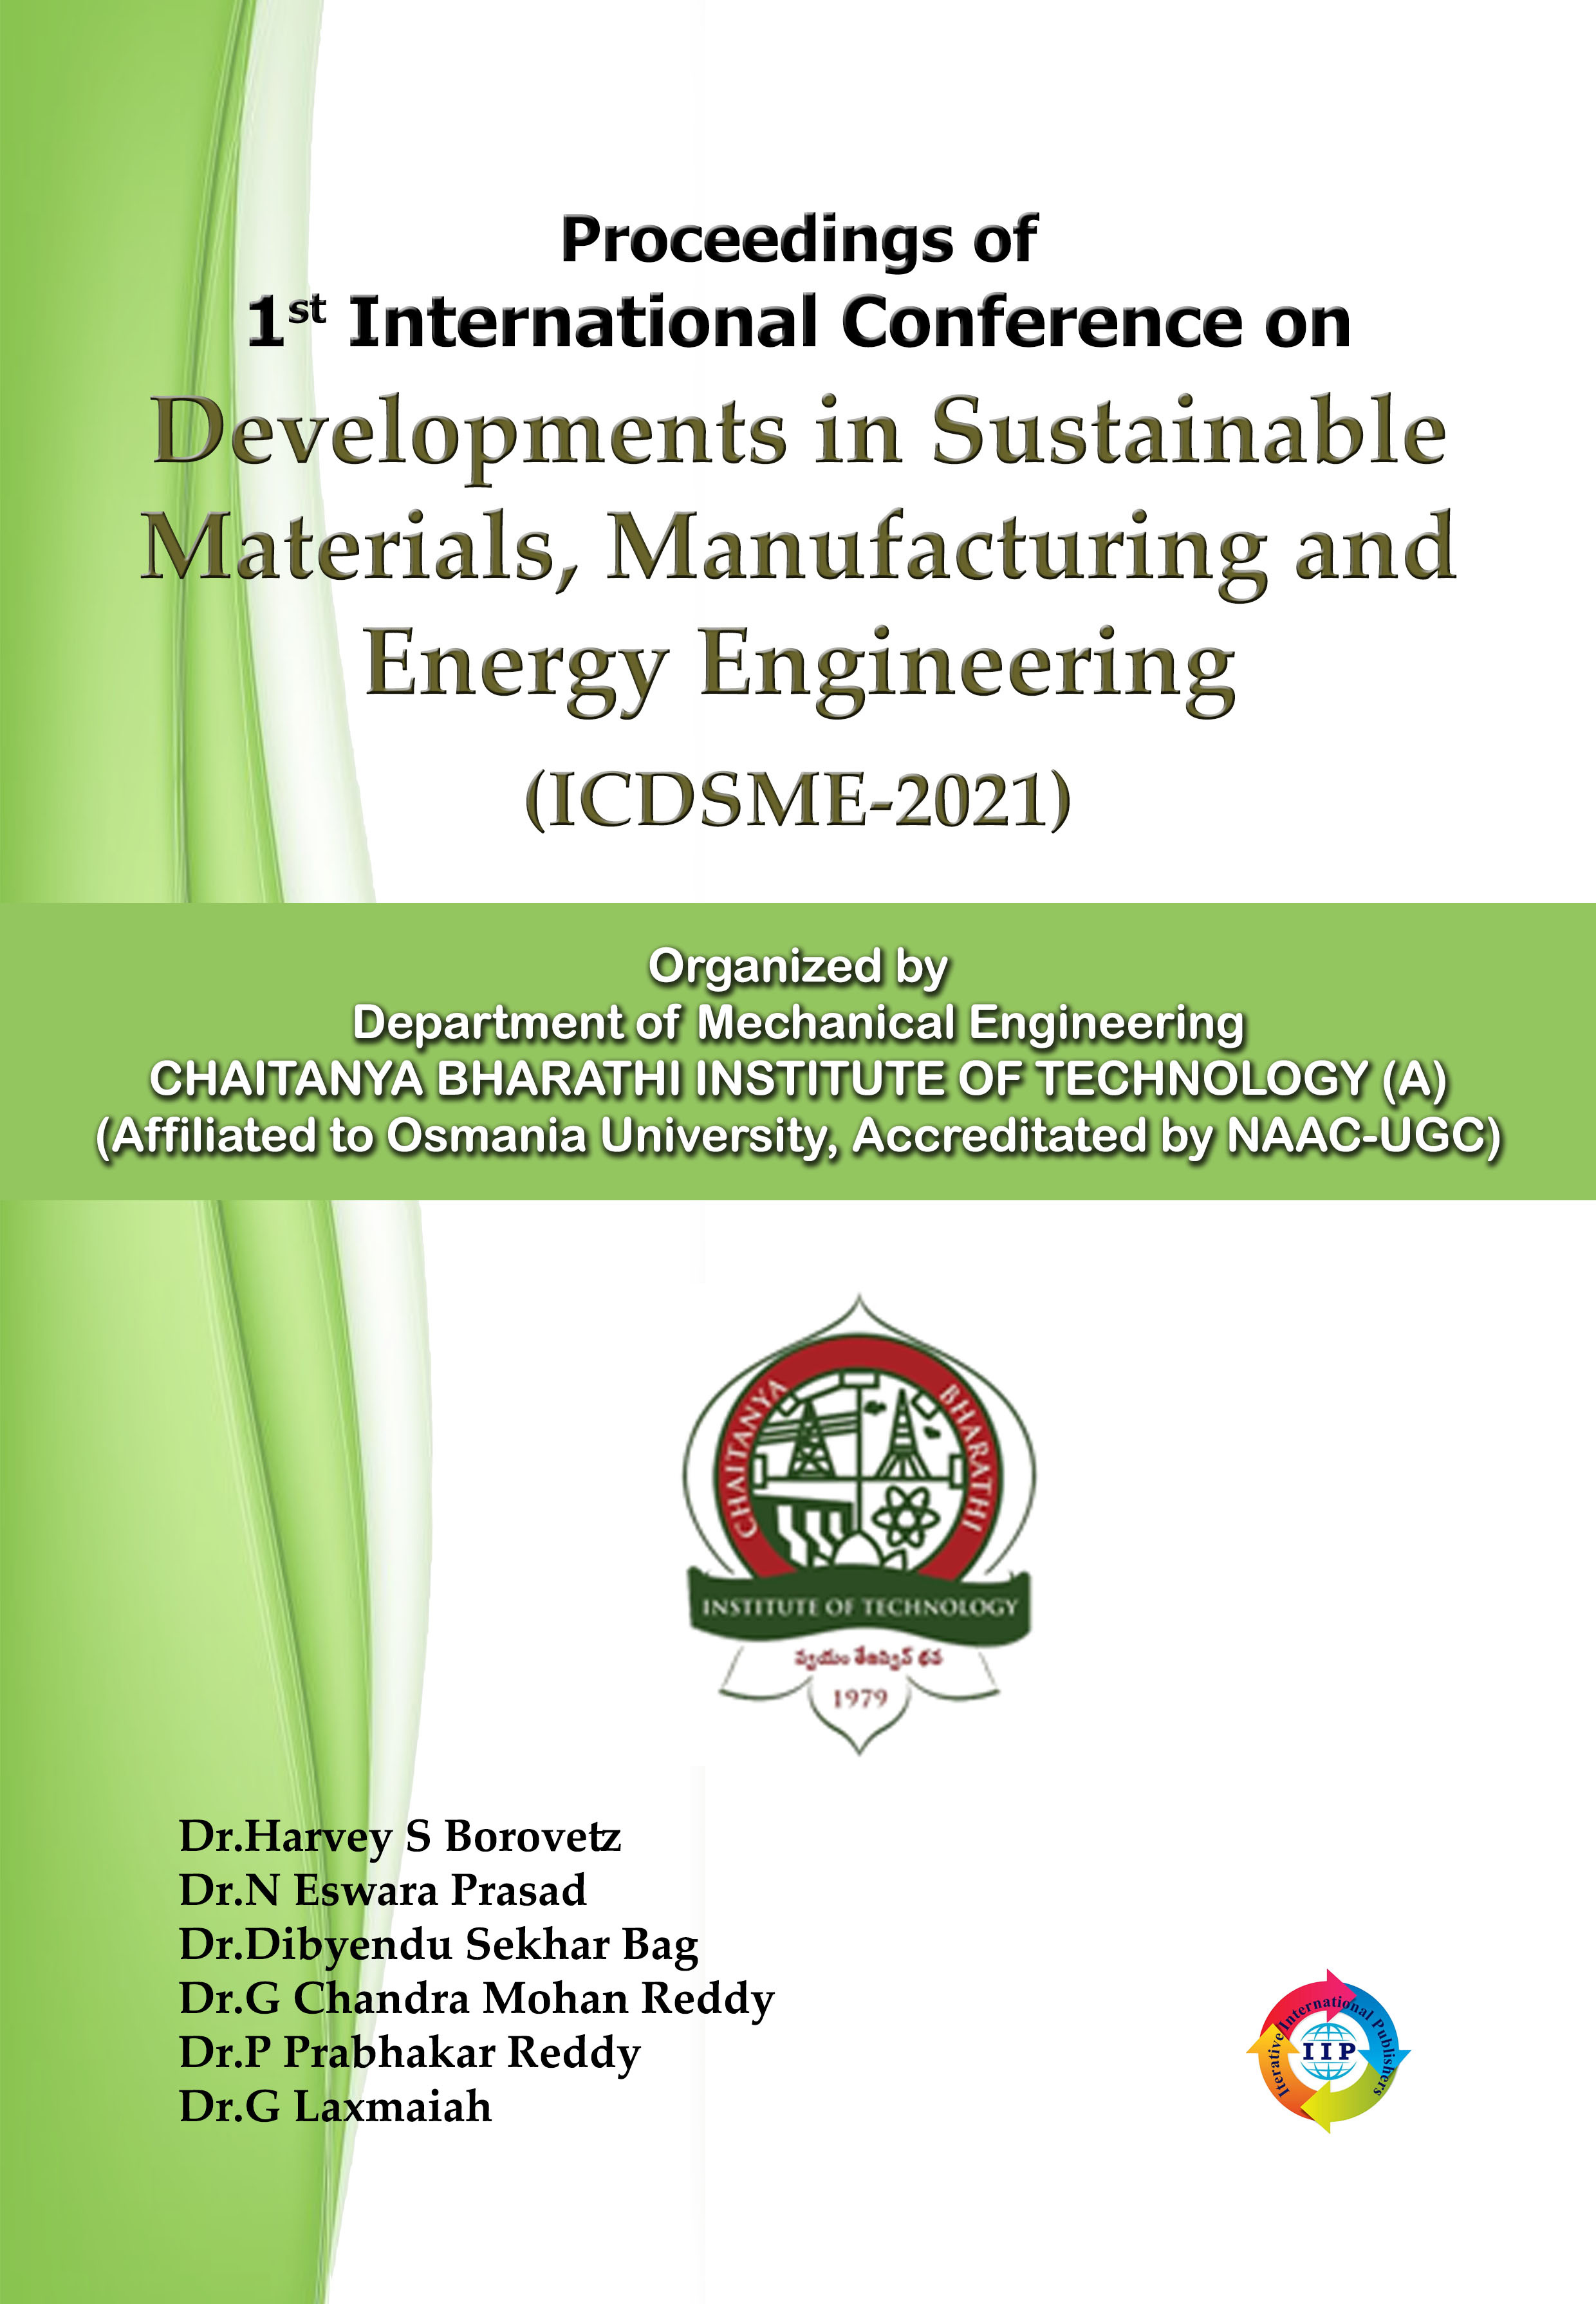 PROCEEDINGS OF 1ST INTERNATIONAL CONFERENCE ON DEVELOPMENTS IN SUSTAINABLE MATERIALS, MANUFACTURING AND ENERGY ENGINEERING (ICDSME-2021)